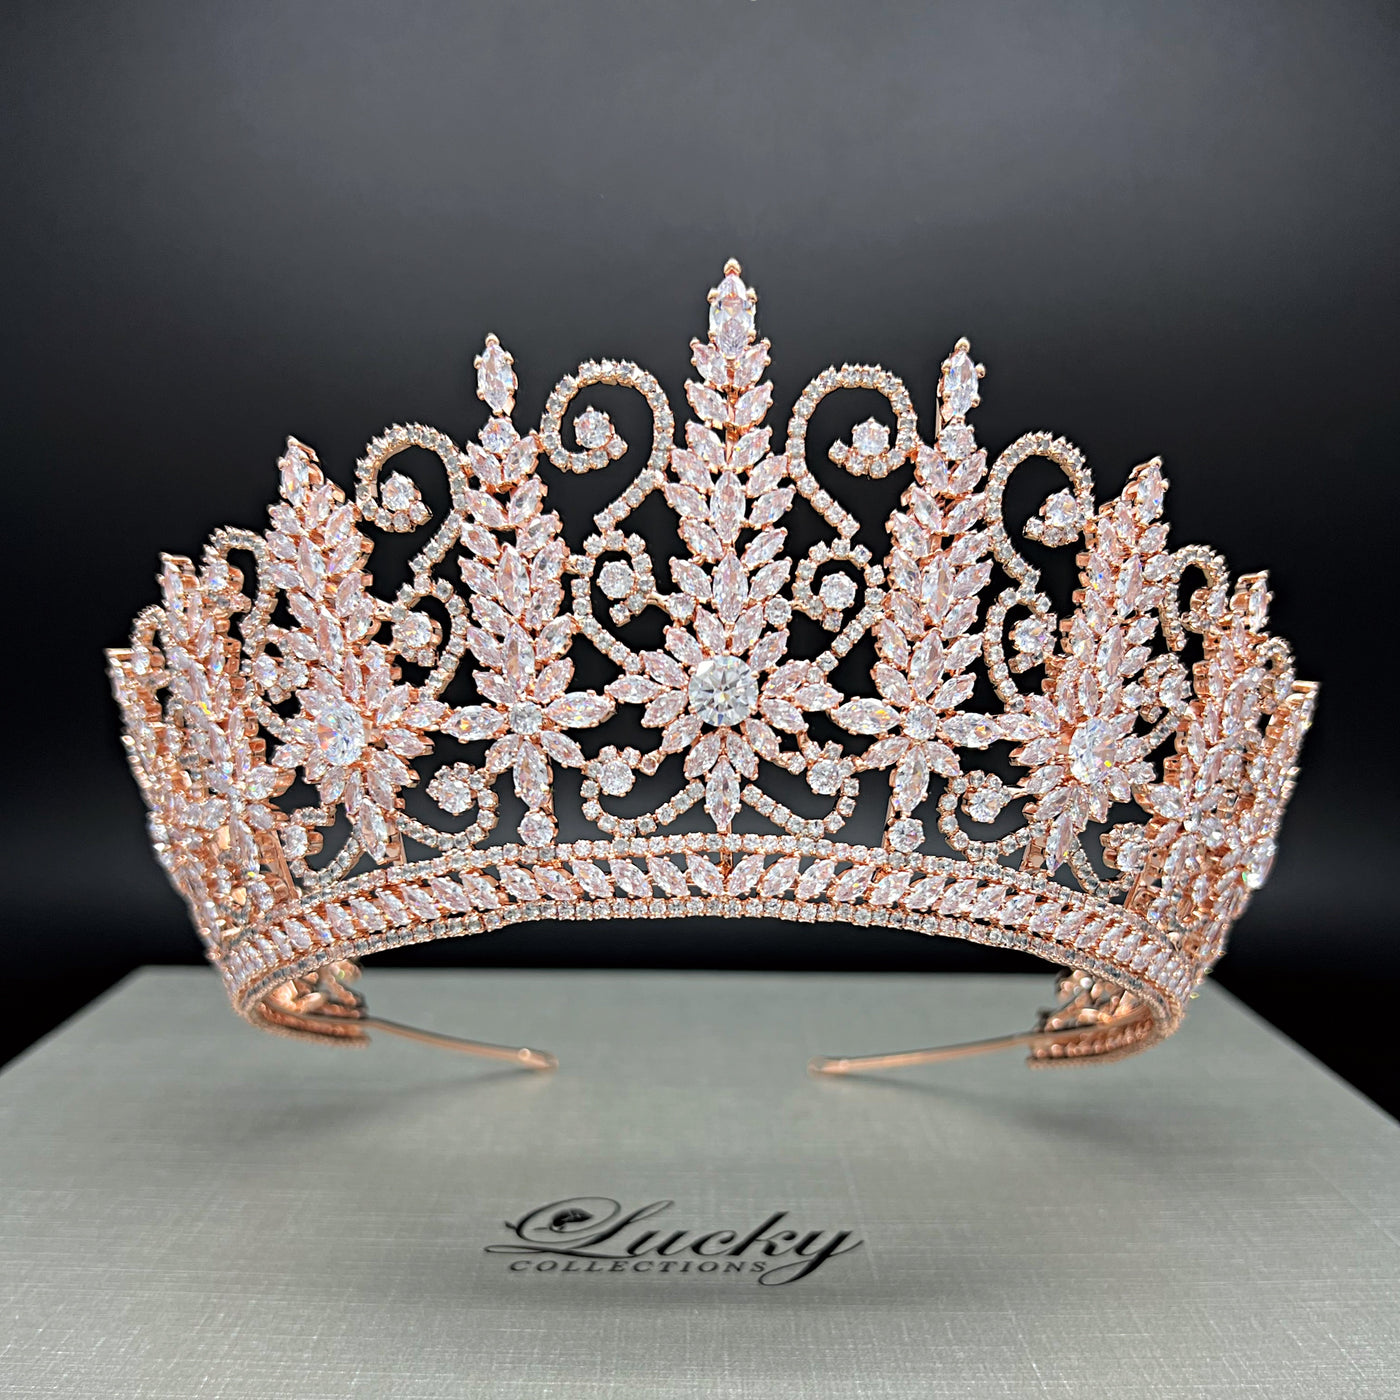 Glitz & Glamour Cubic Zirconia Tiara shines better than Swarovski Crystals and is a new favorite of quince